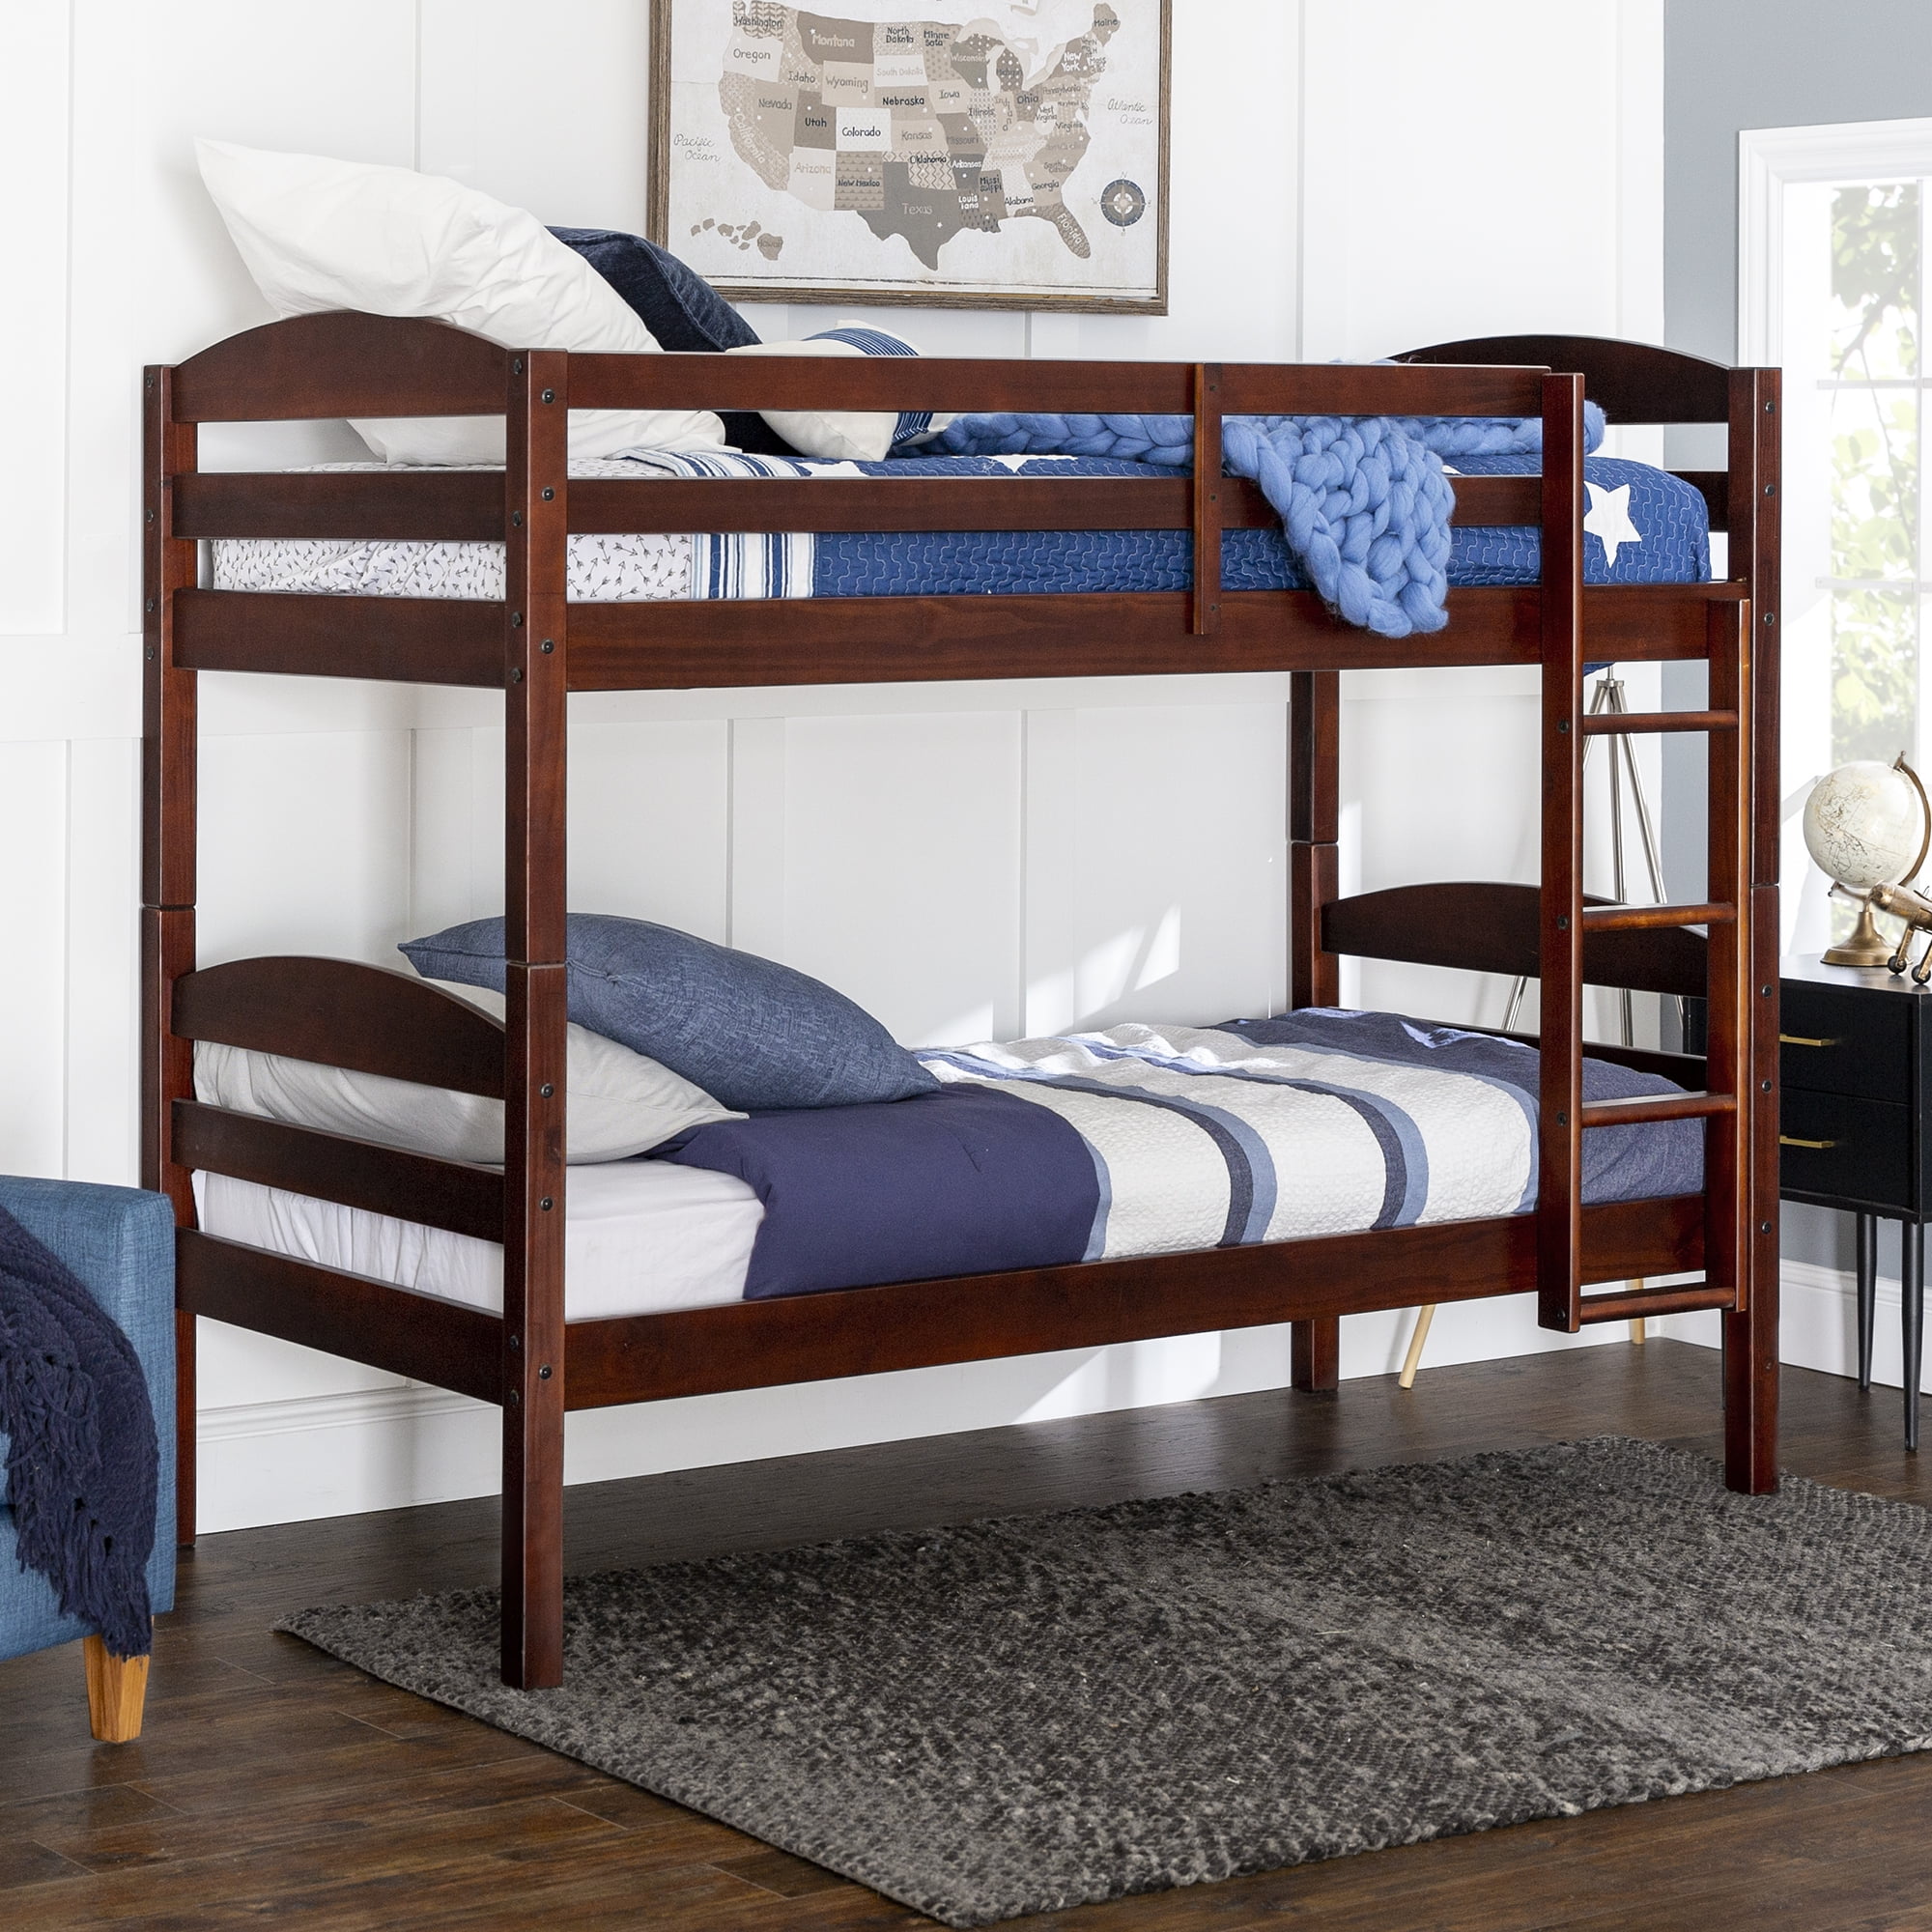 Walker Edison Solid Wood Twin Over, Wooden Bunk Beds With Mattresses